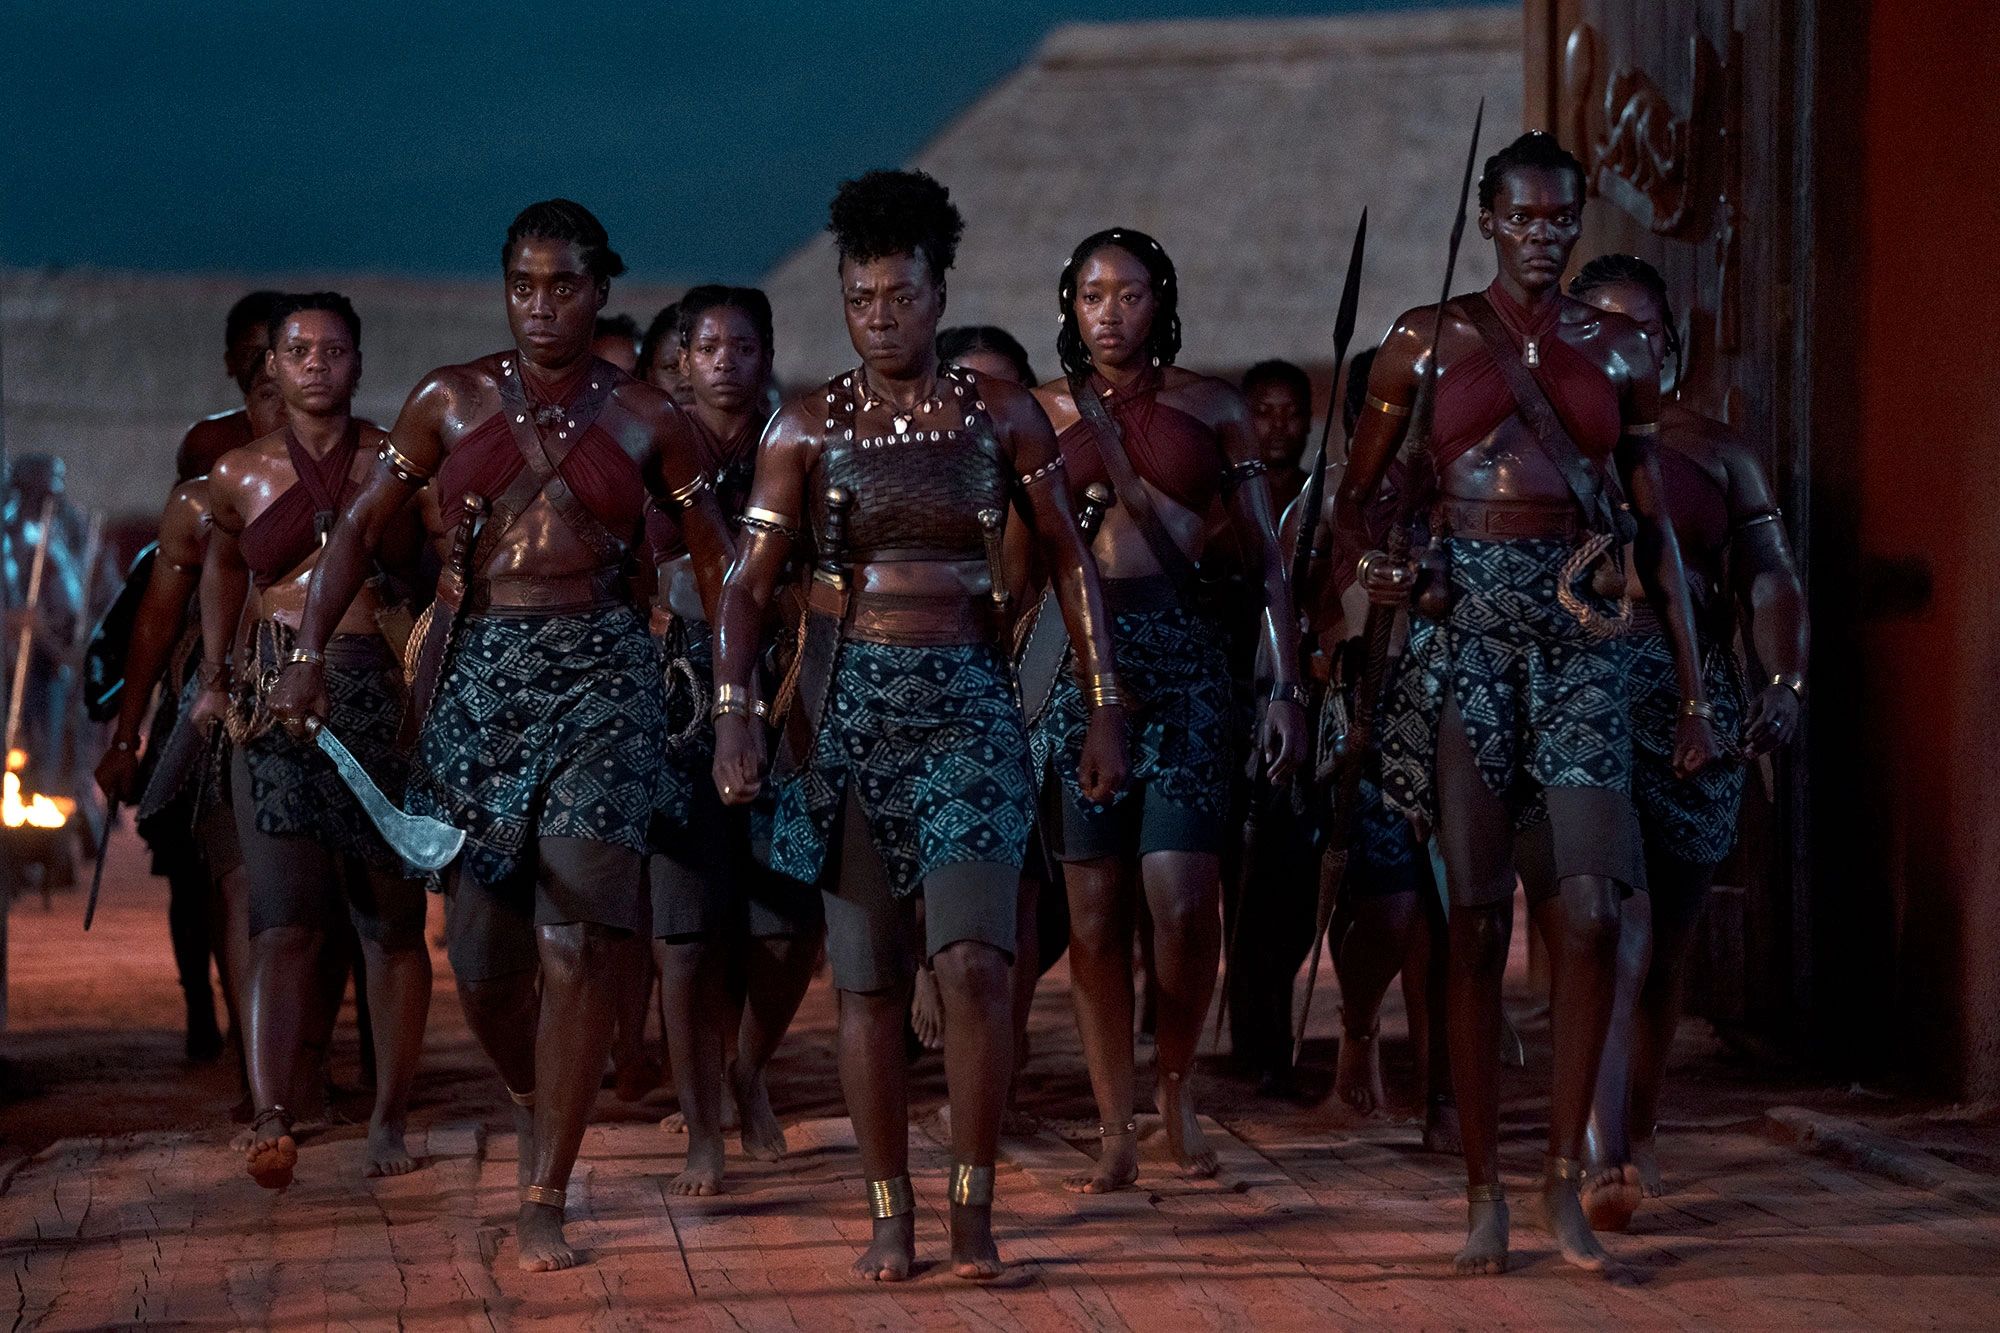 The Real History Behind 'The Woman King', The Agojie Warriors of Dahomey, History